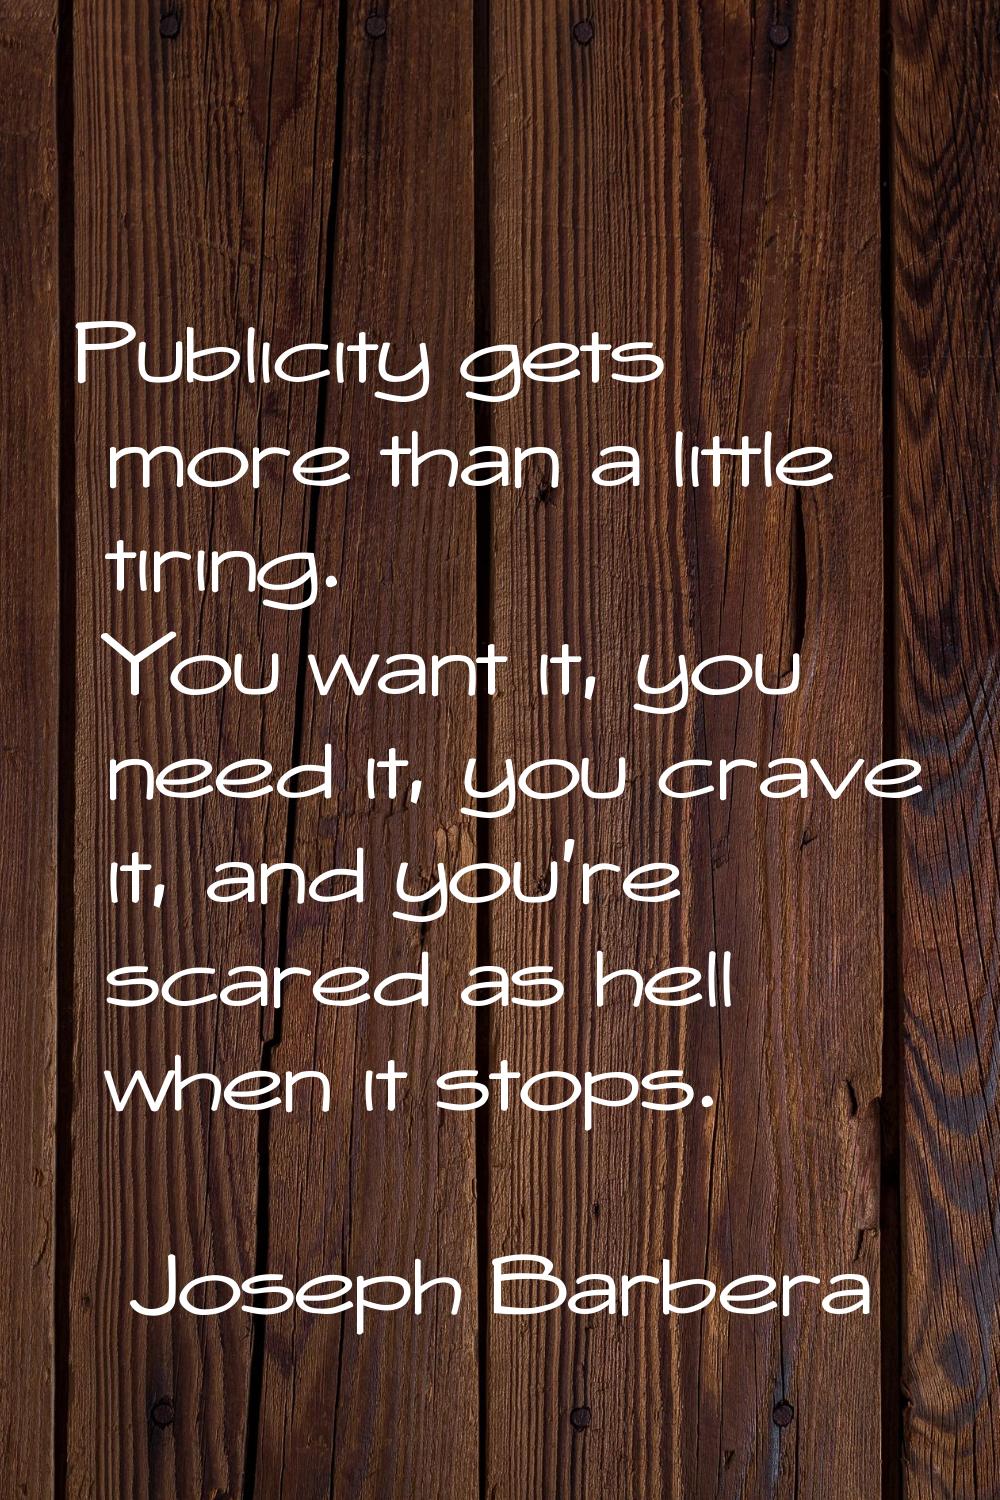 Publicity gets more than a little tiring. You want it, you need it, you crave it, and you're scared